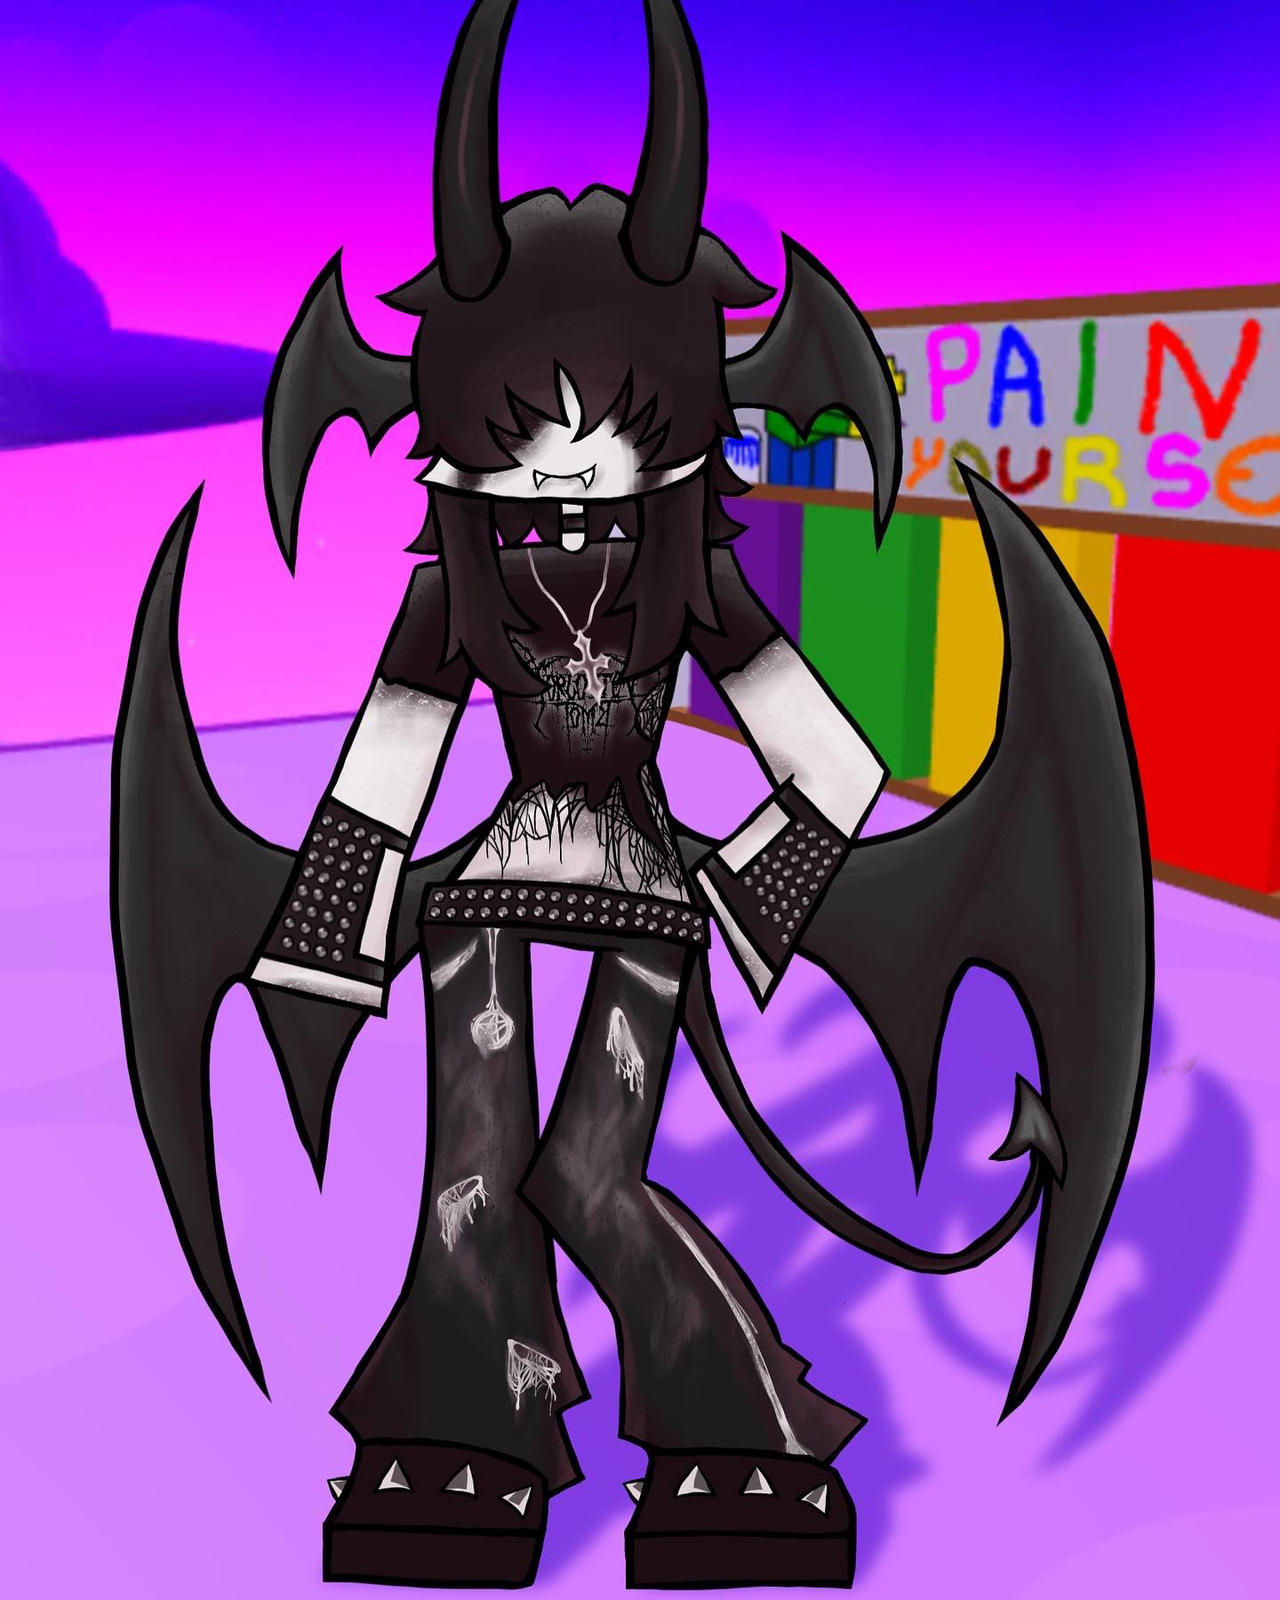 my roblox avatar i later turned into an oc named odin